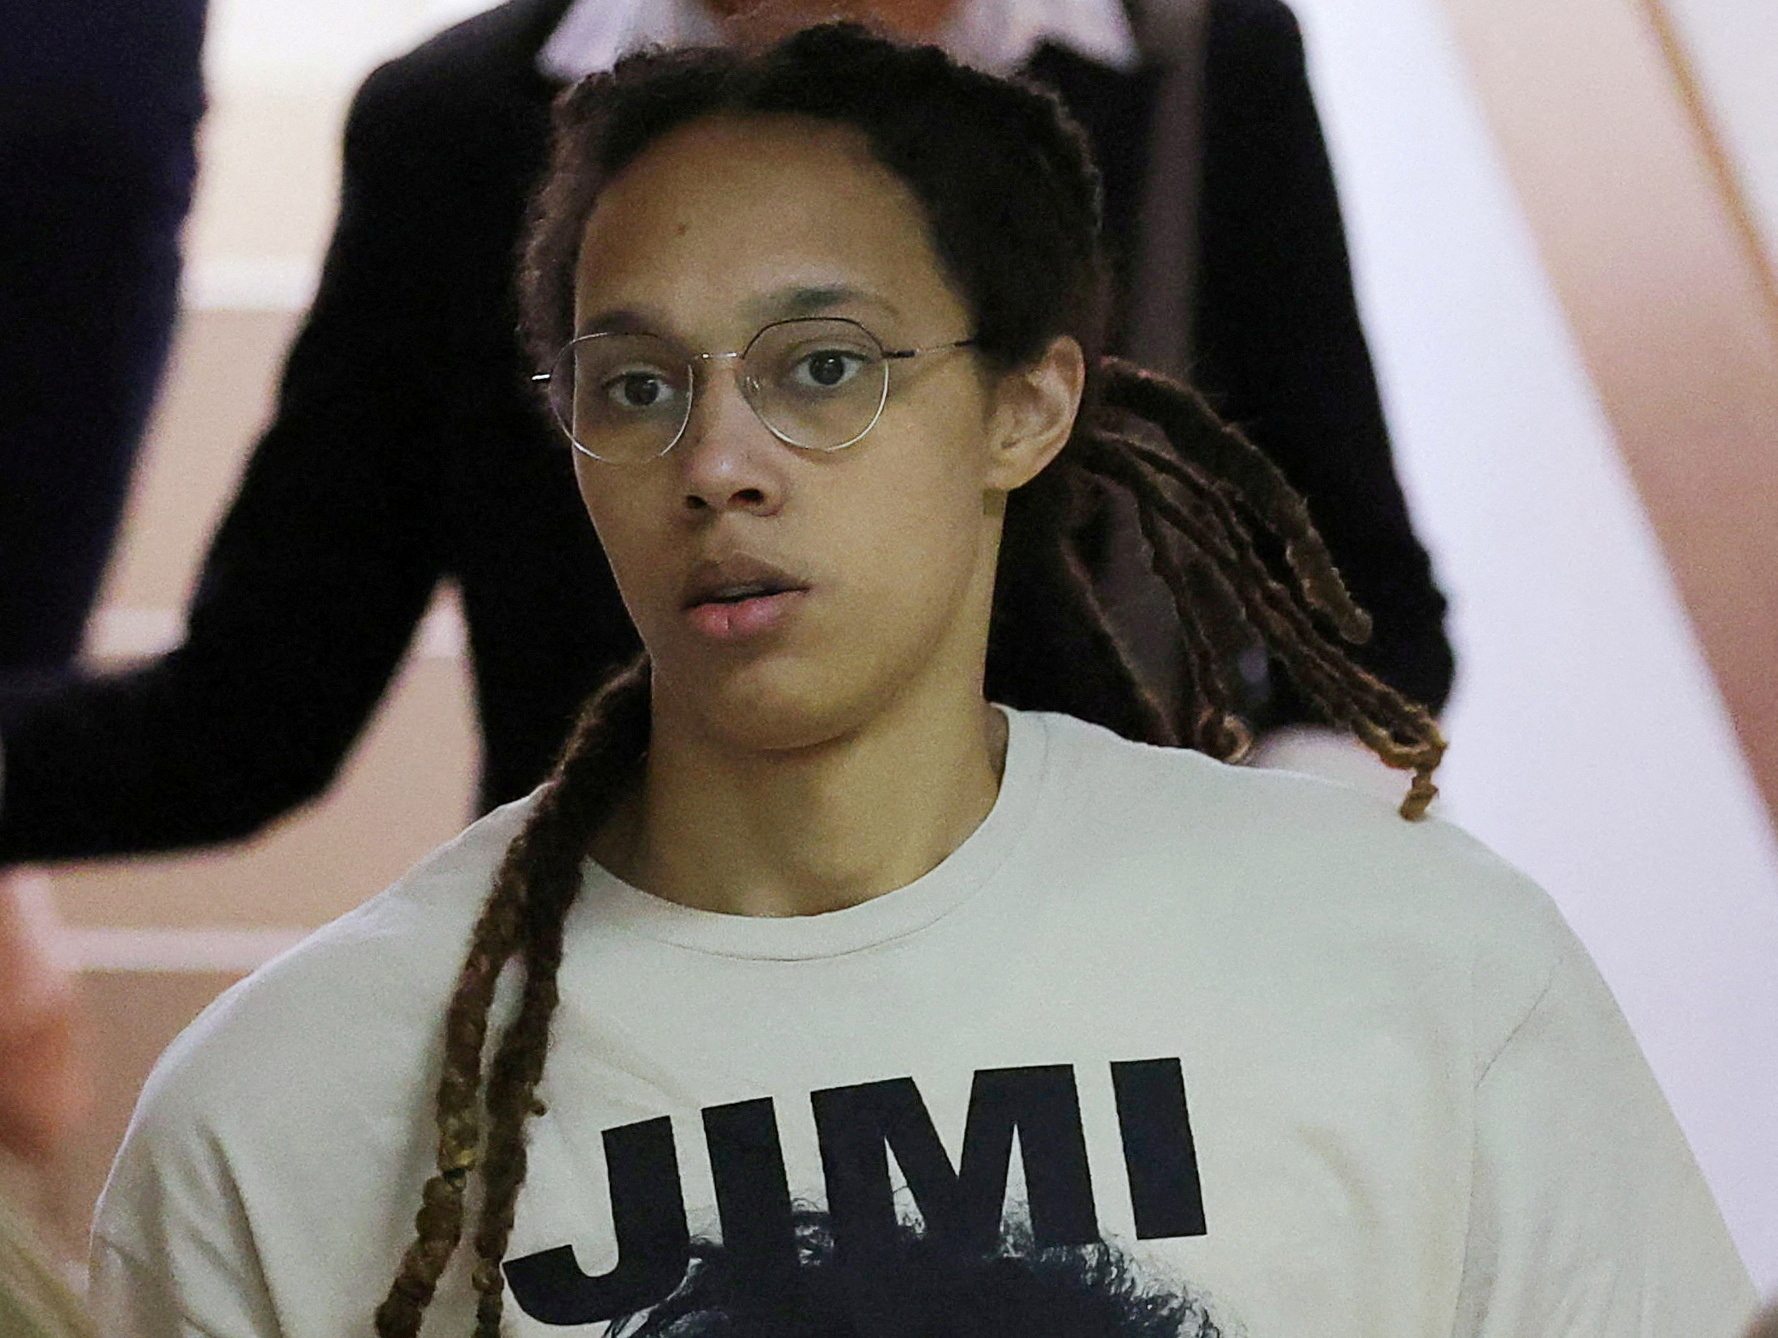 FILE PHOTO: U.S. basketball player Brittney Griner, who was detained in March at Moscow's Sheremetyevo airport and later charged with illegal possession of cannabis, is escorted before a court hearing in Khimki outside Moscow, Russia July 1, 2022. REUTERS/Evgenia Novozhenina/File Photo